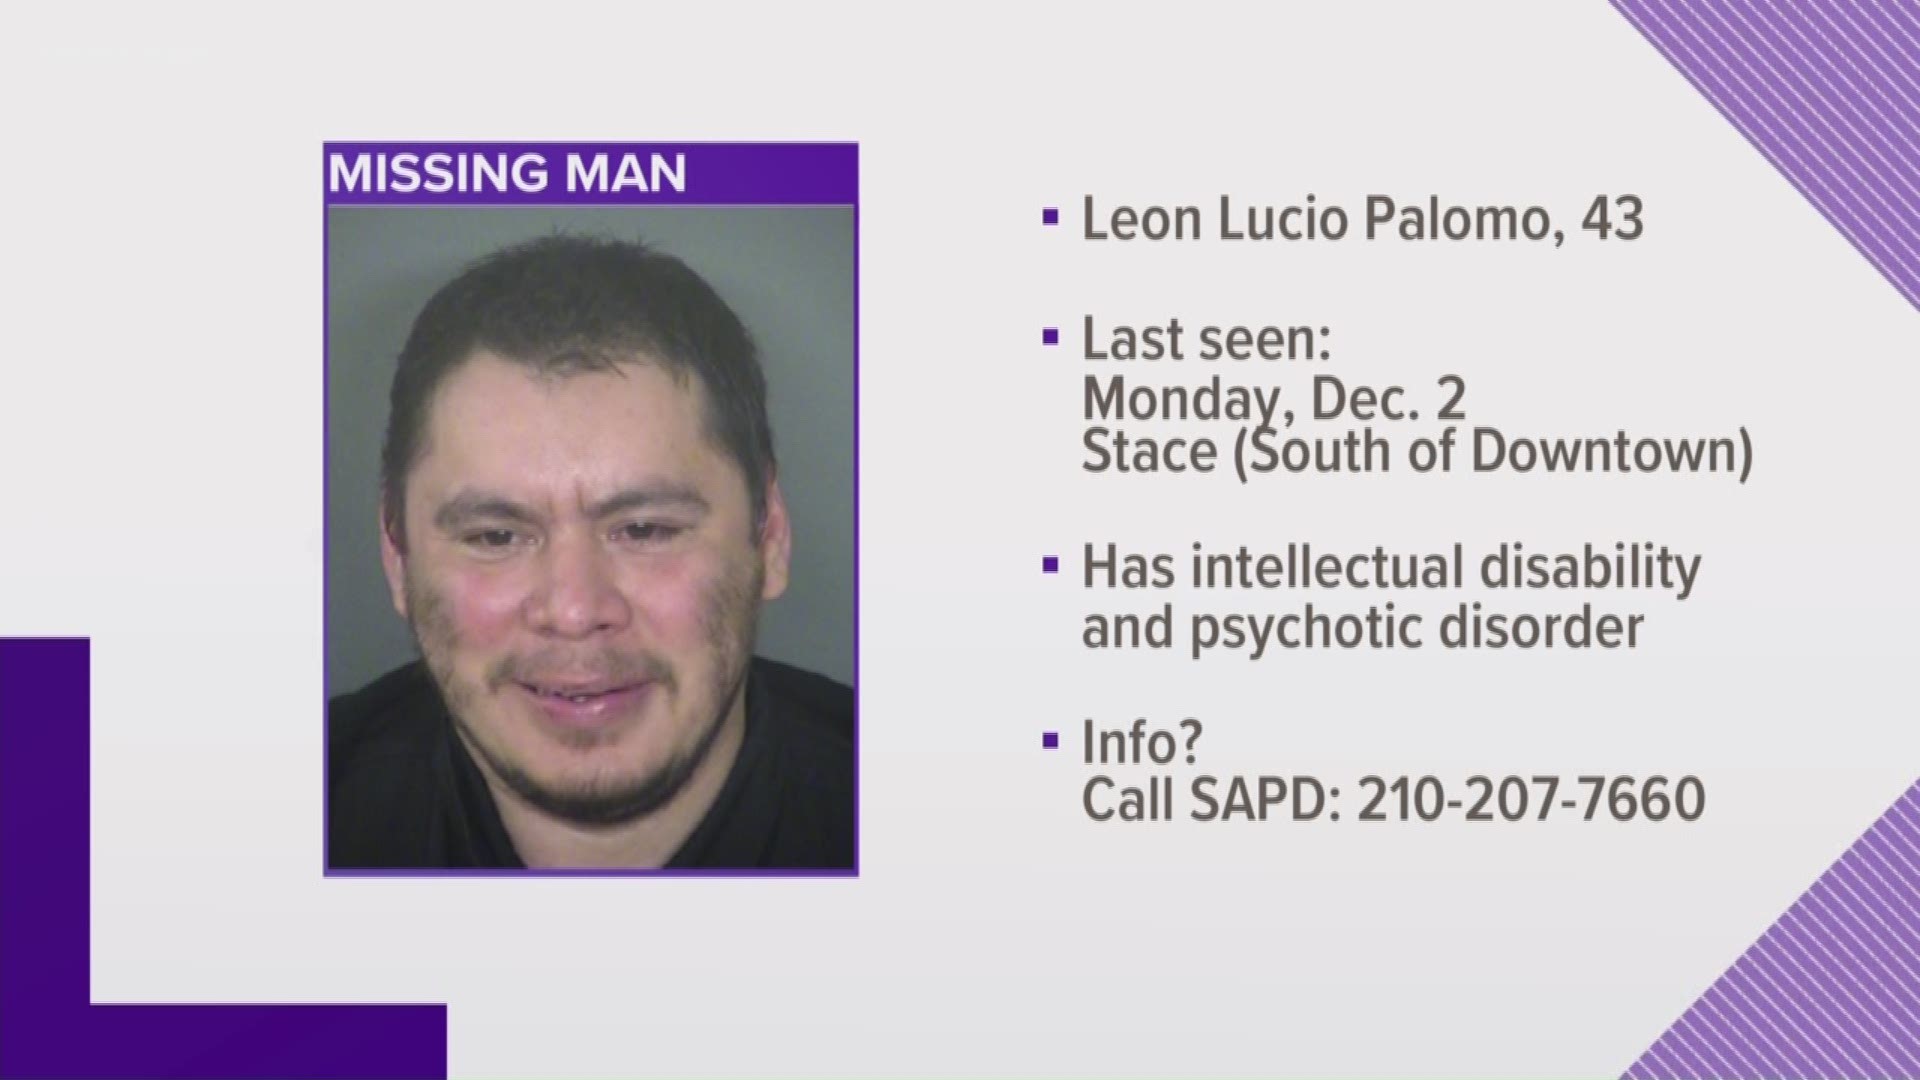 The San Antonio Police Department is asking for the public's help in their search for Leon Lucio Palomo.